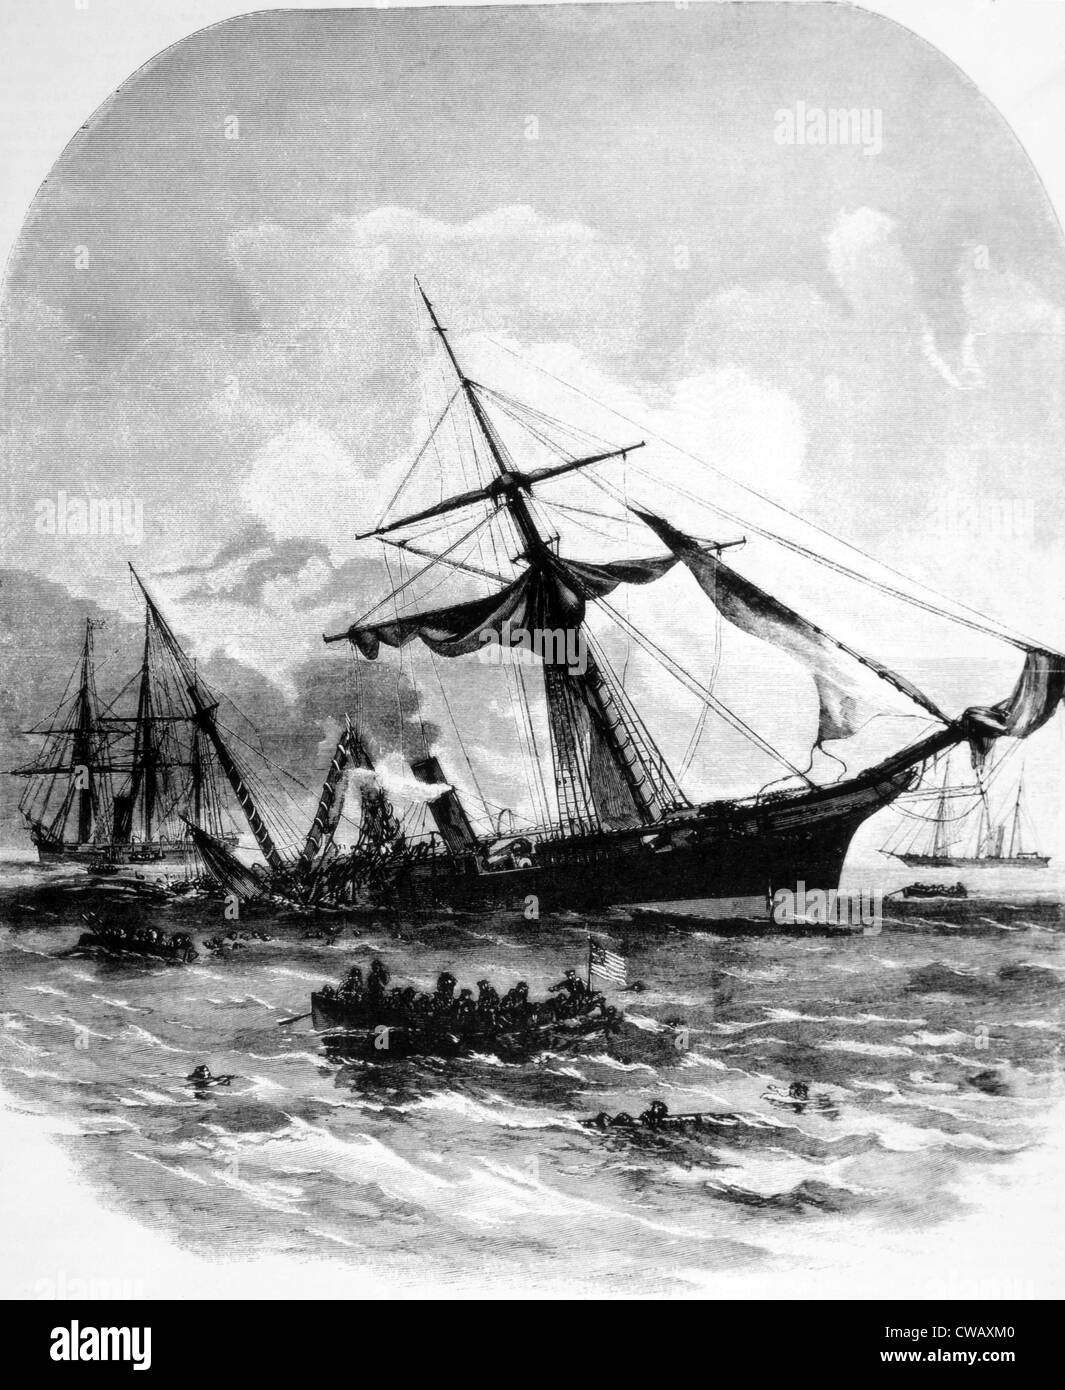 Destruction of the Confederate cruiser 'Alabama' off Cherbourg, France, June 19, 1864 Stock Photo